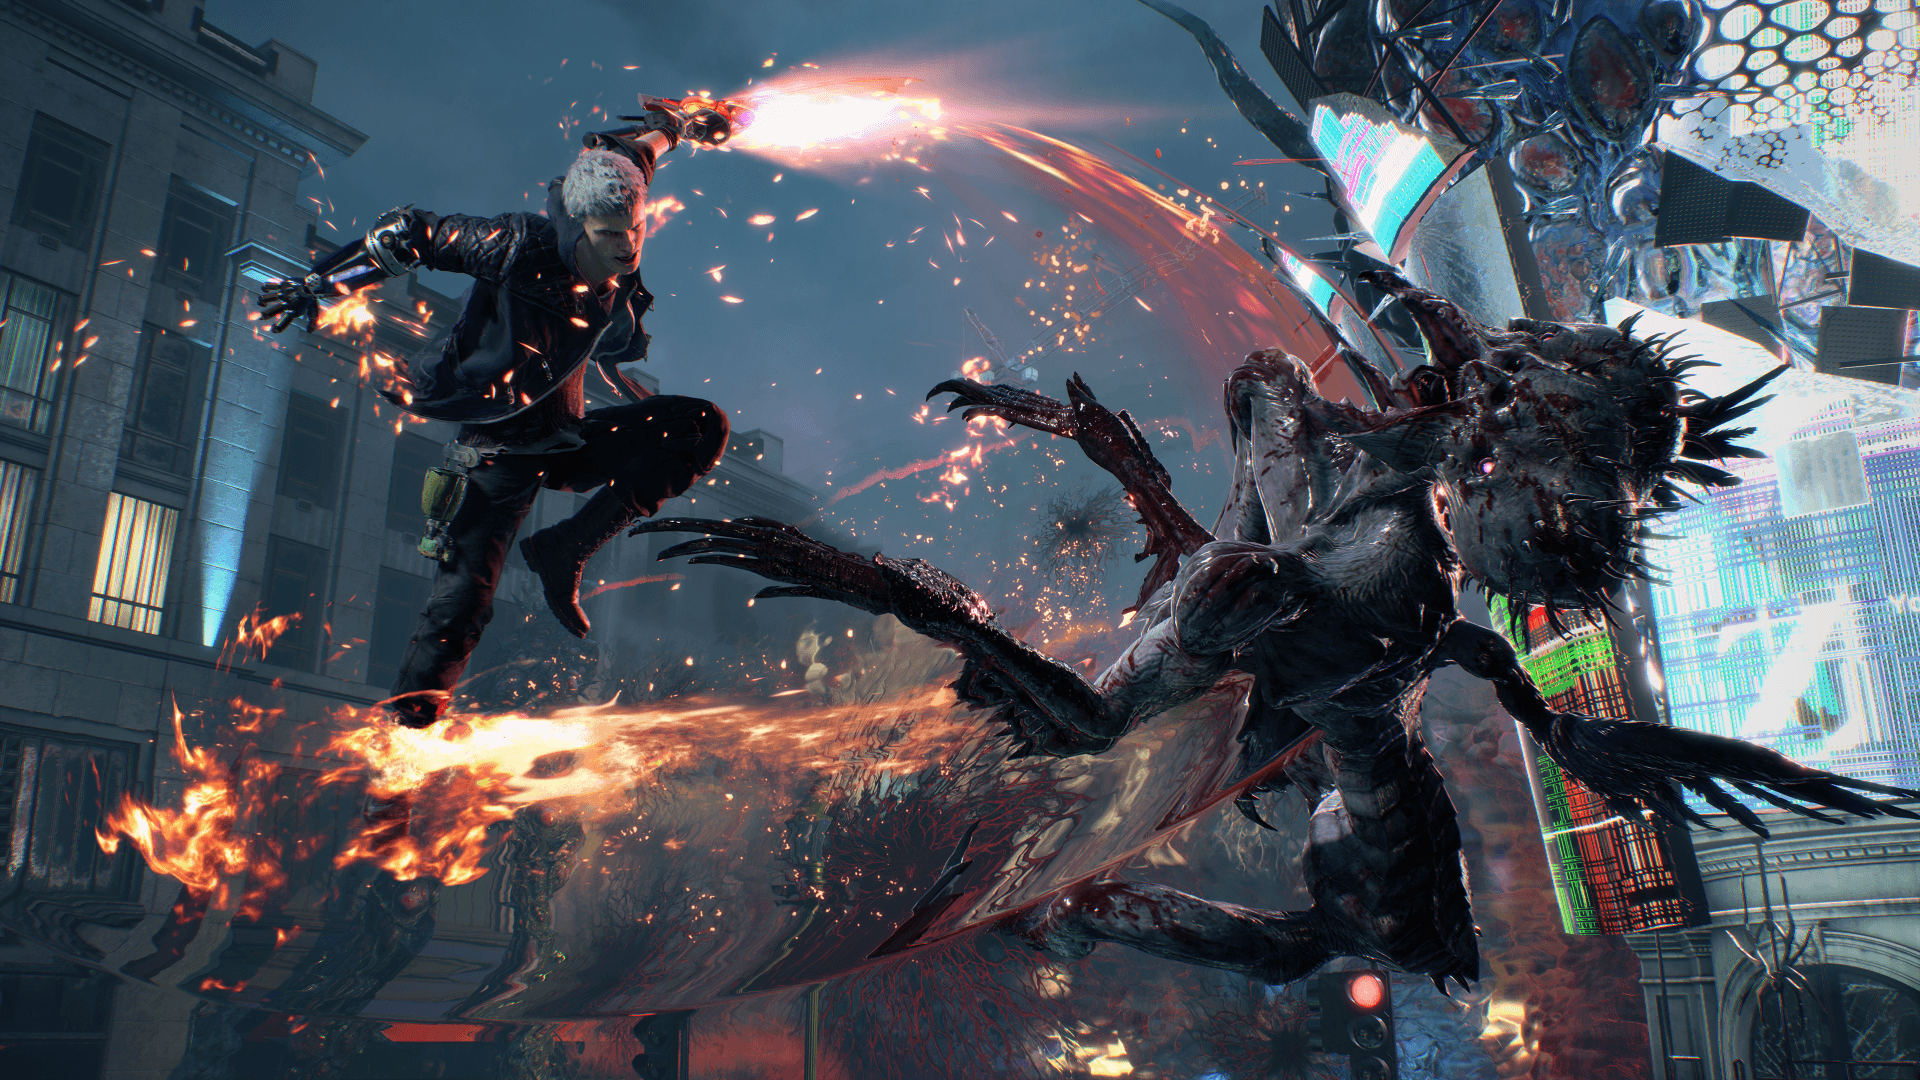 Devil May Cry 5 Desktop Wallpapers Top Free Devil May Cry 5 Desktop Backgrounds Wallpaperaccess